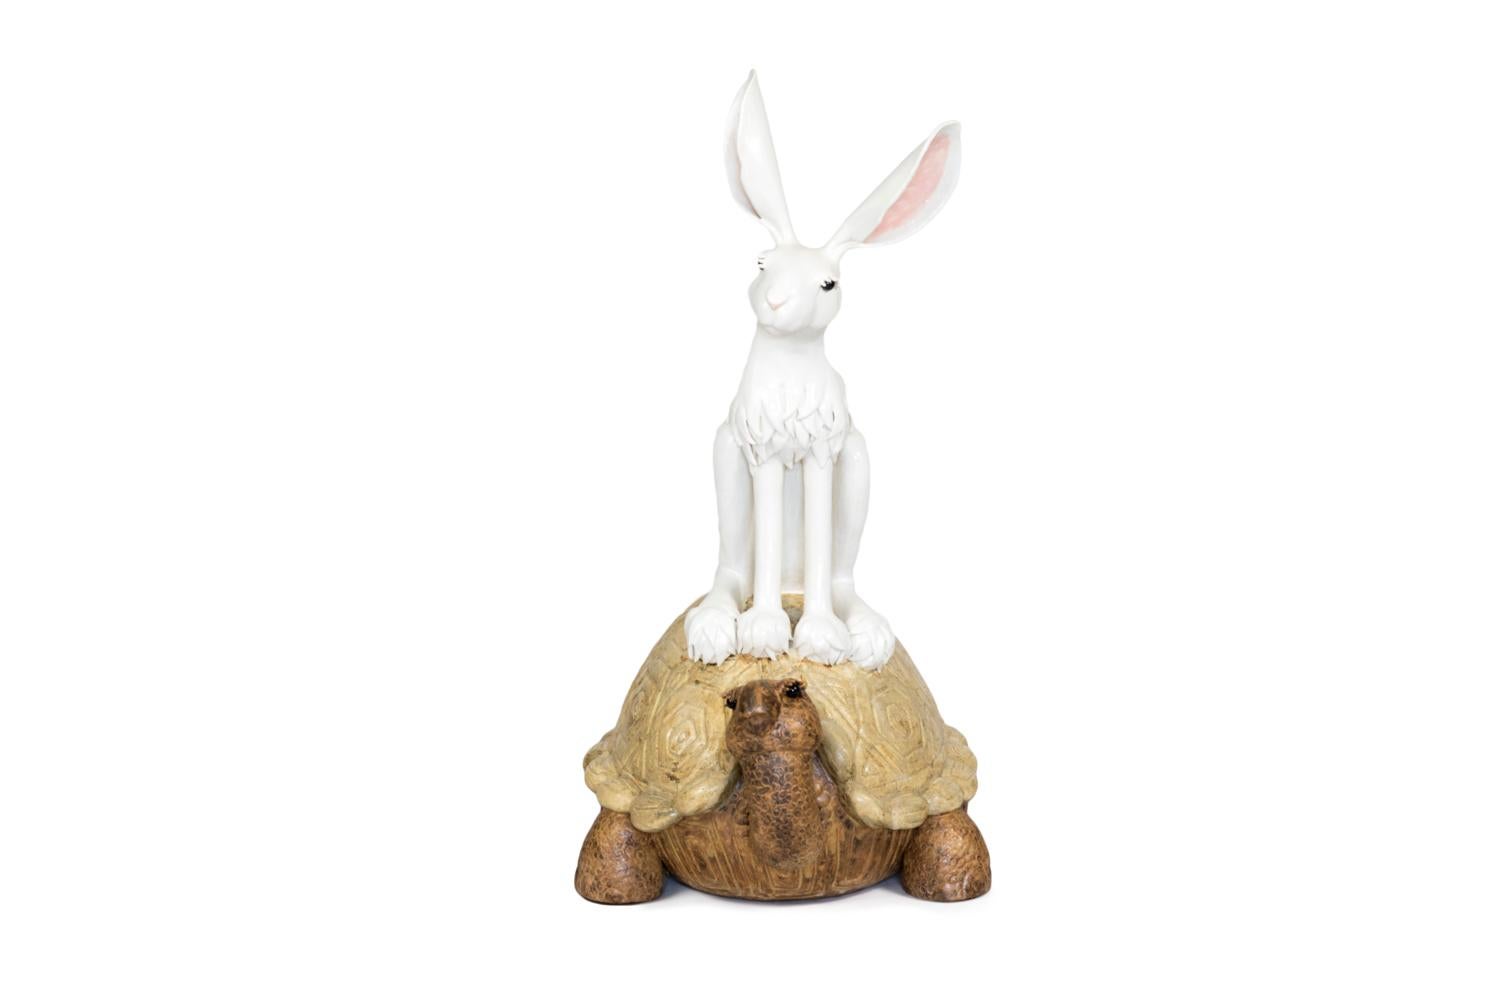 Valérie Courtet, signed.

Glazed stoneware sculpture figuring a rabbit sat on a tortoise back.
The rabbit is white, represented with hairs around its neck and on its paws, large ears pink on the interior, black eyes and slightly bending its head